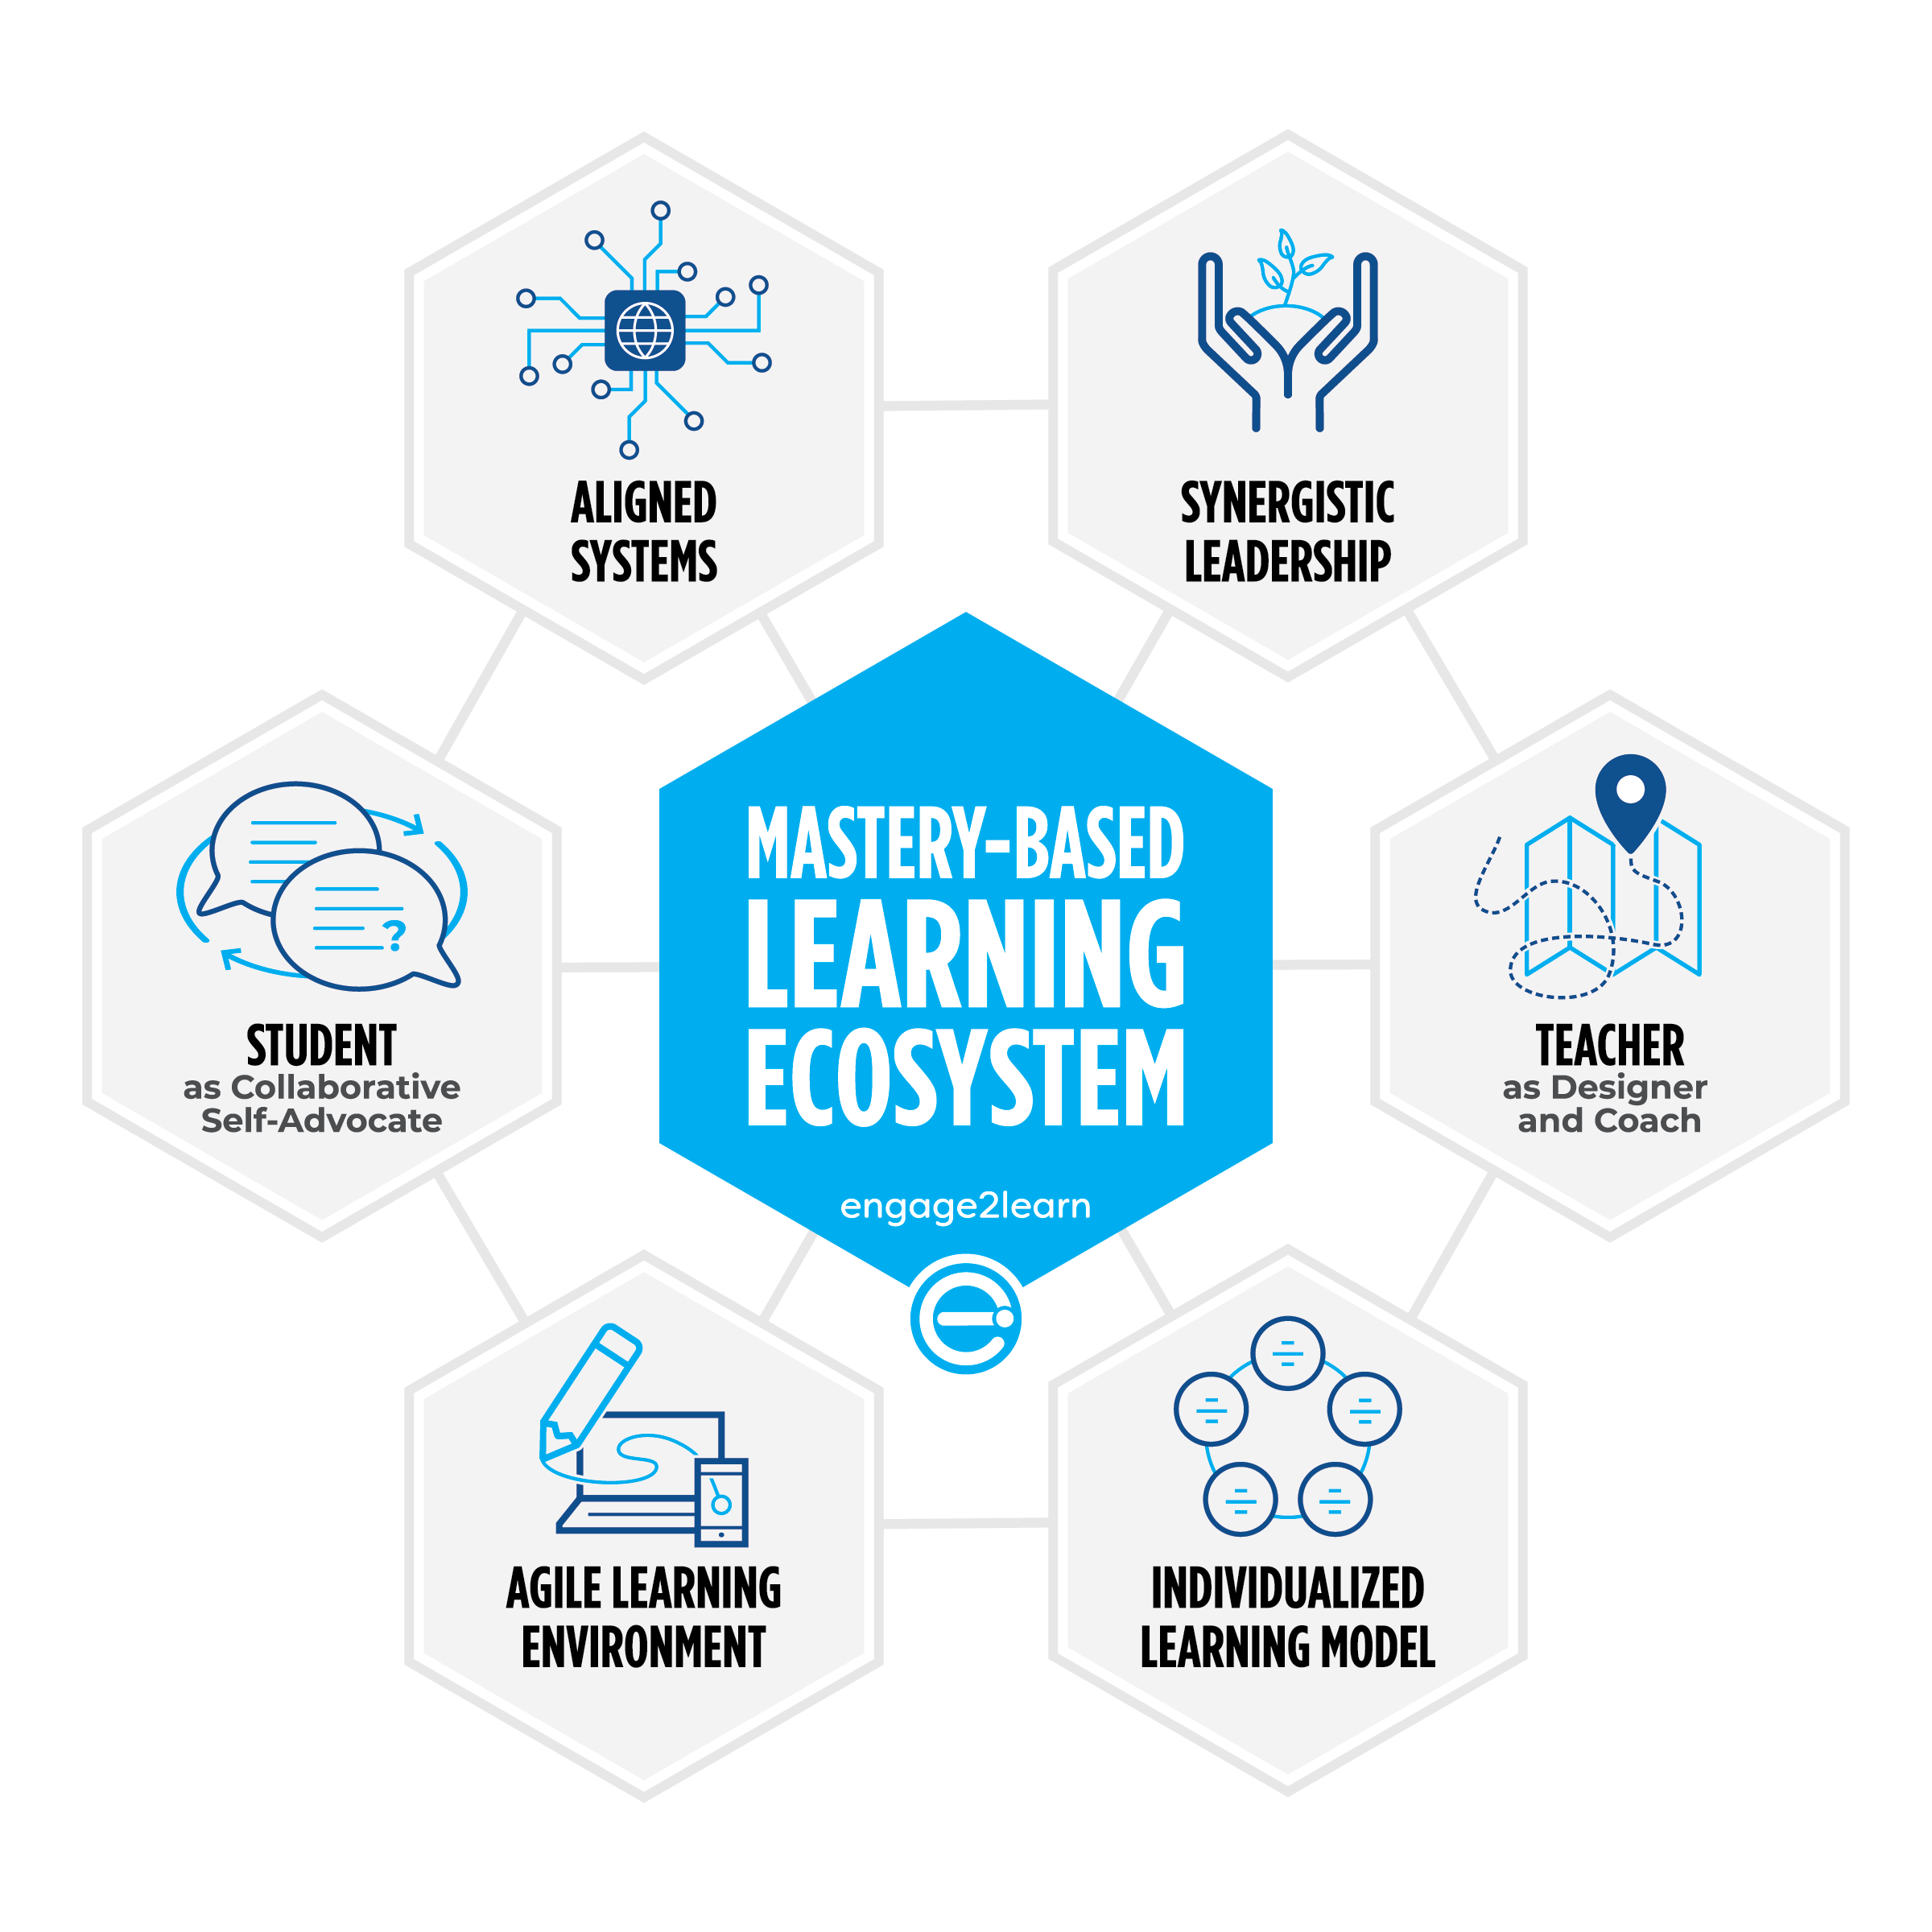 Mastery-Based Learning Ecosystem with icons for - Aligned Systems, Synergistic Leadership, Student as Collaborative Self-Advocate, Teacher as designer and coach, Agile Learning Environment, and Individualized Learning Model